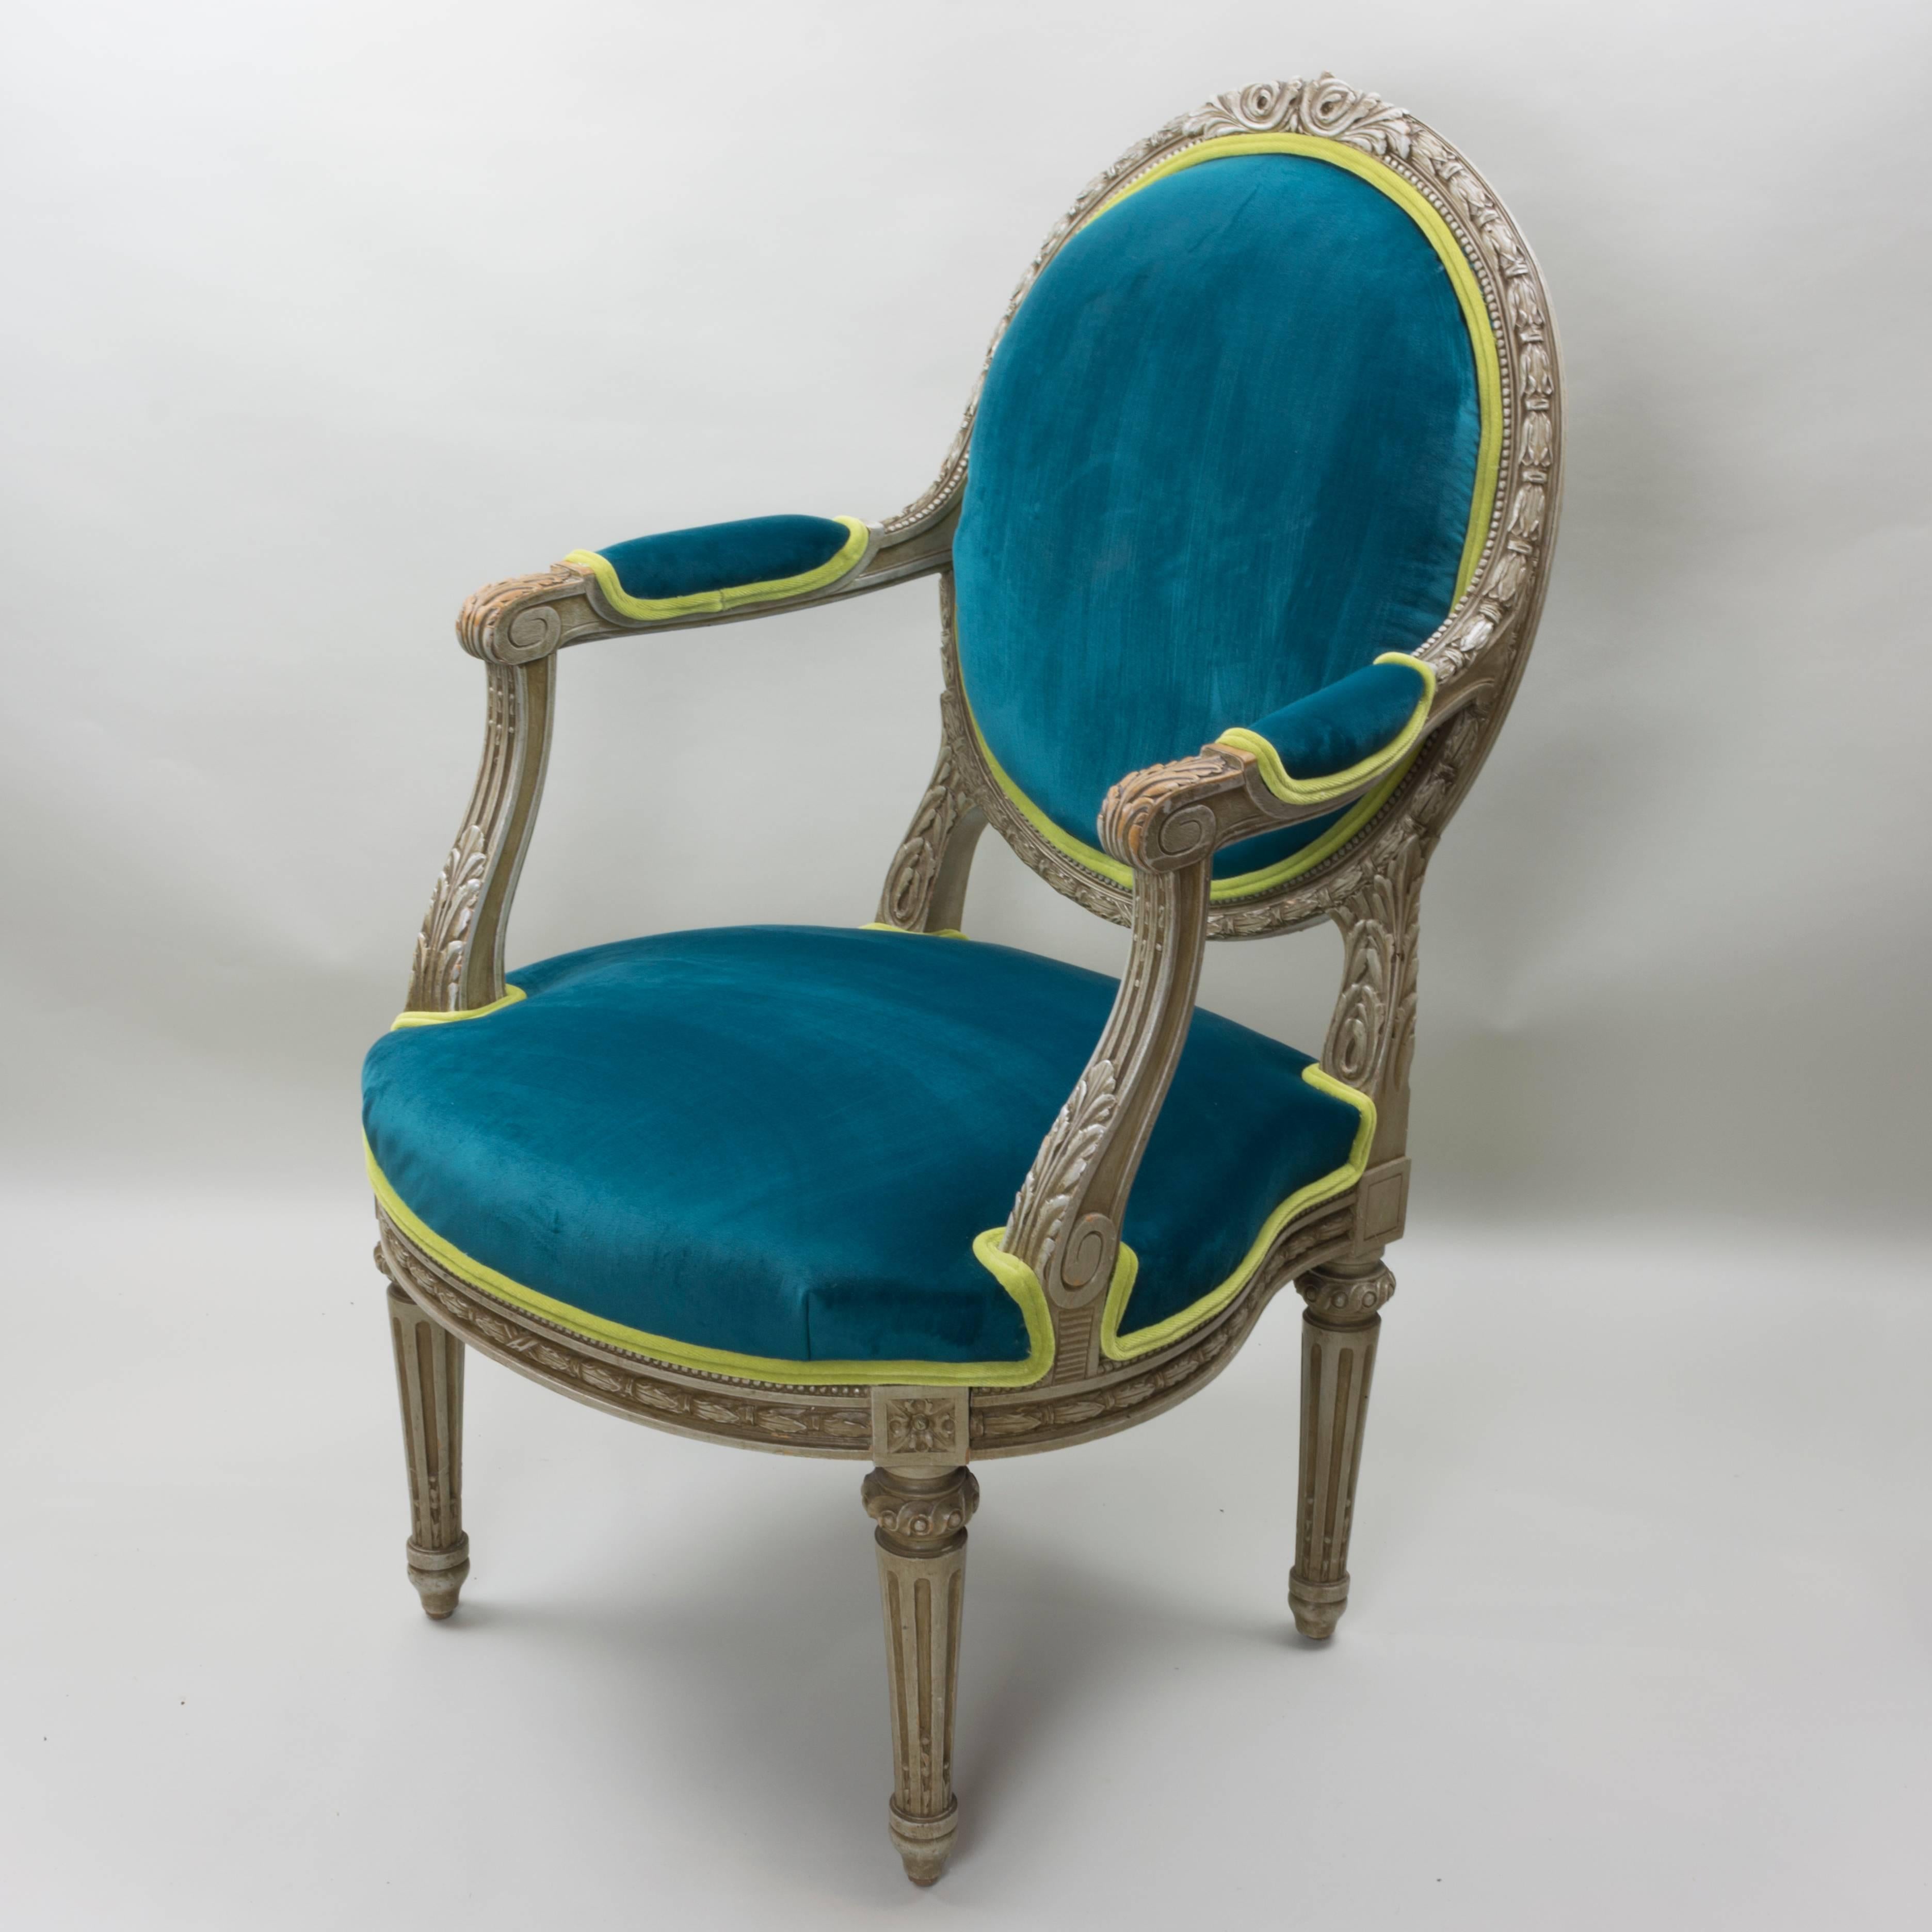 This pair of Louis XVI style armchairs have been recently updated in a lush blue-pine velvet and a coordinating lively lime velvet. These chairs were meant to make a statement. Now with the updated upholstery and the original design details, they